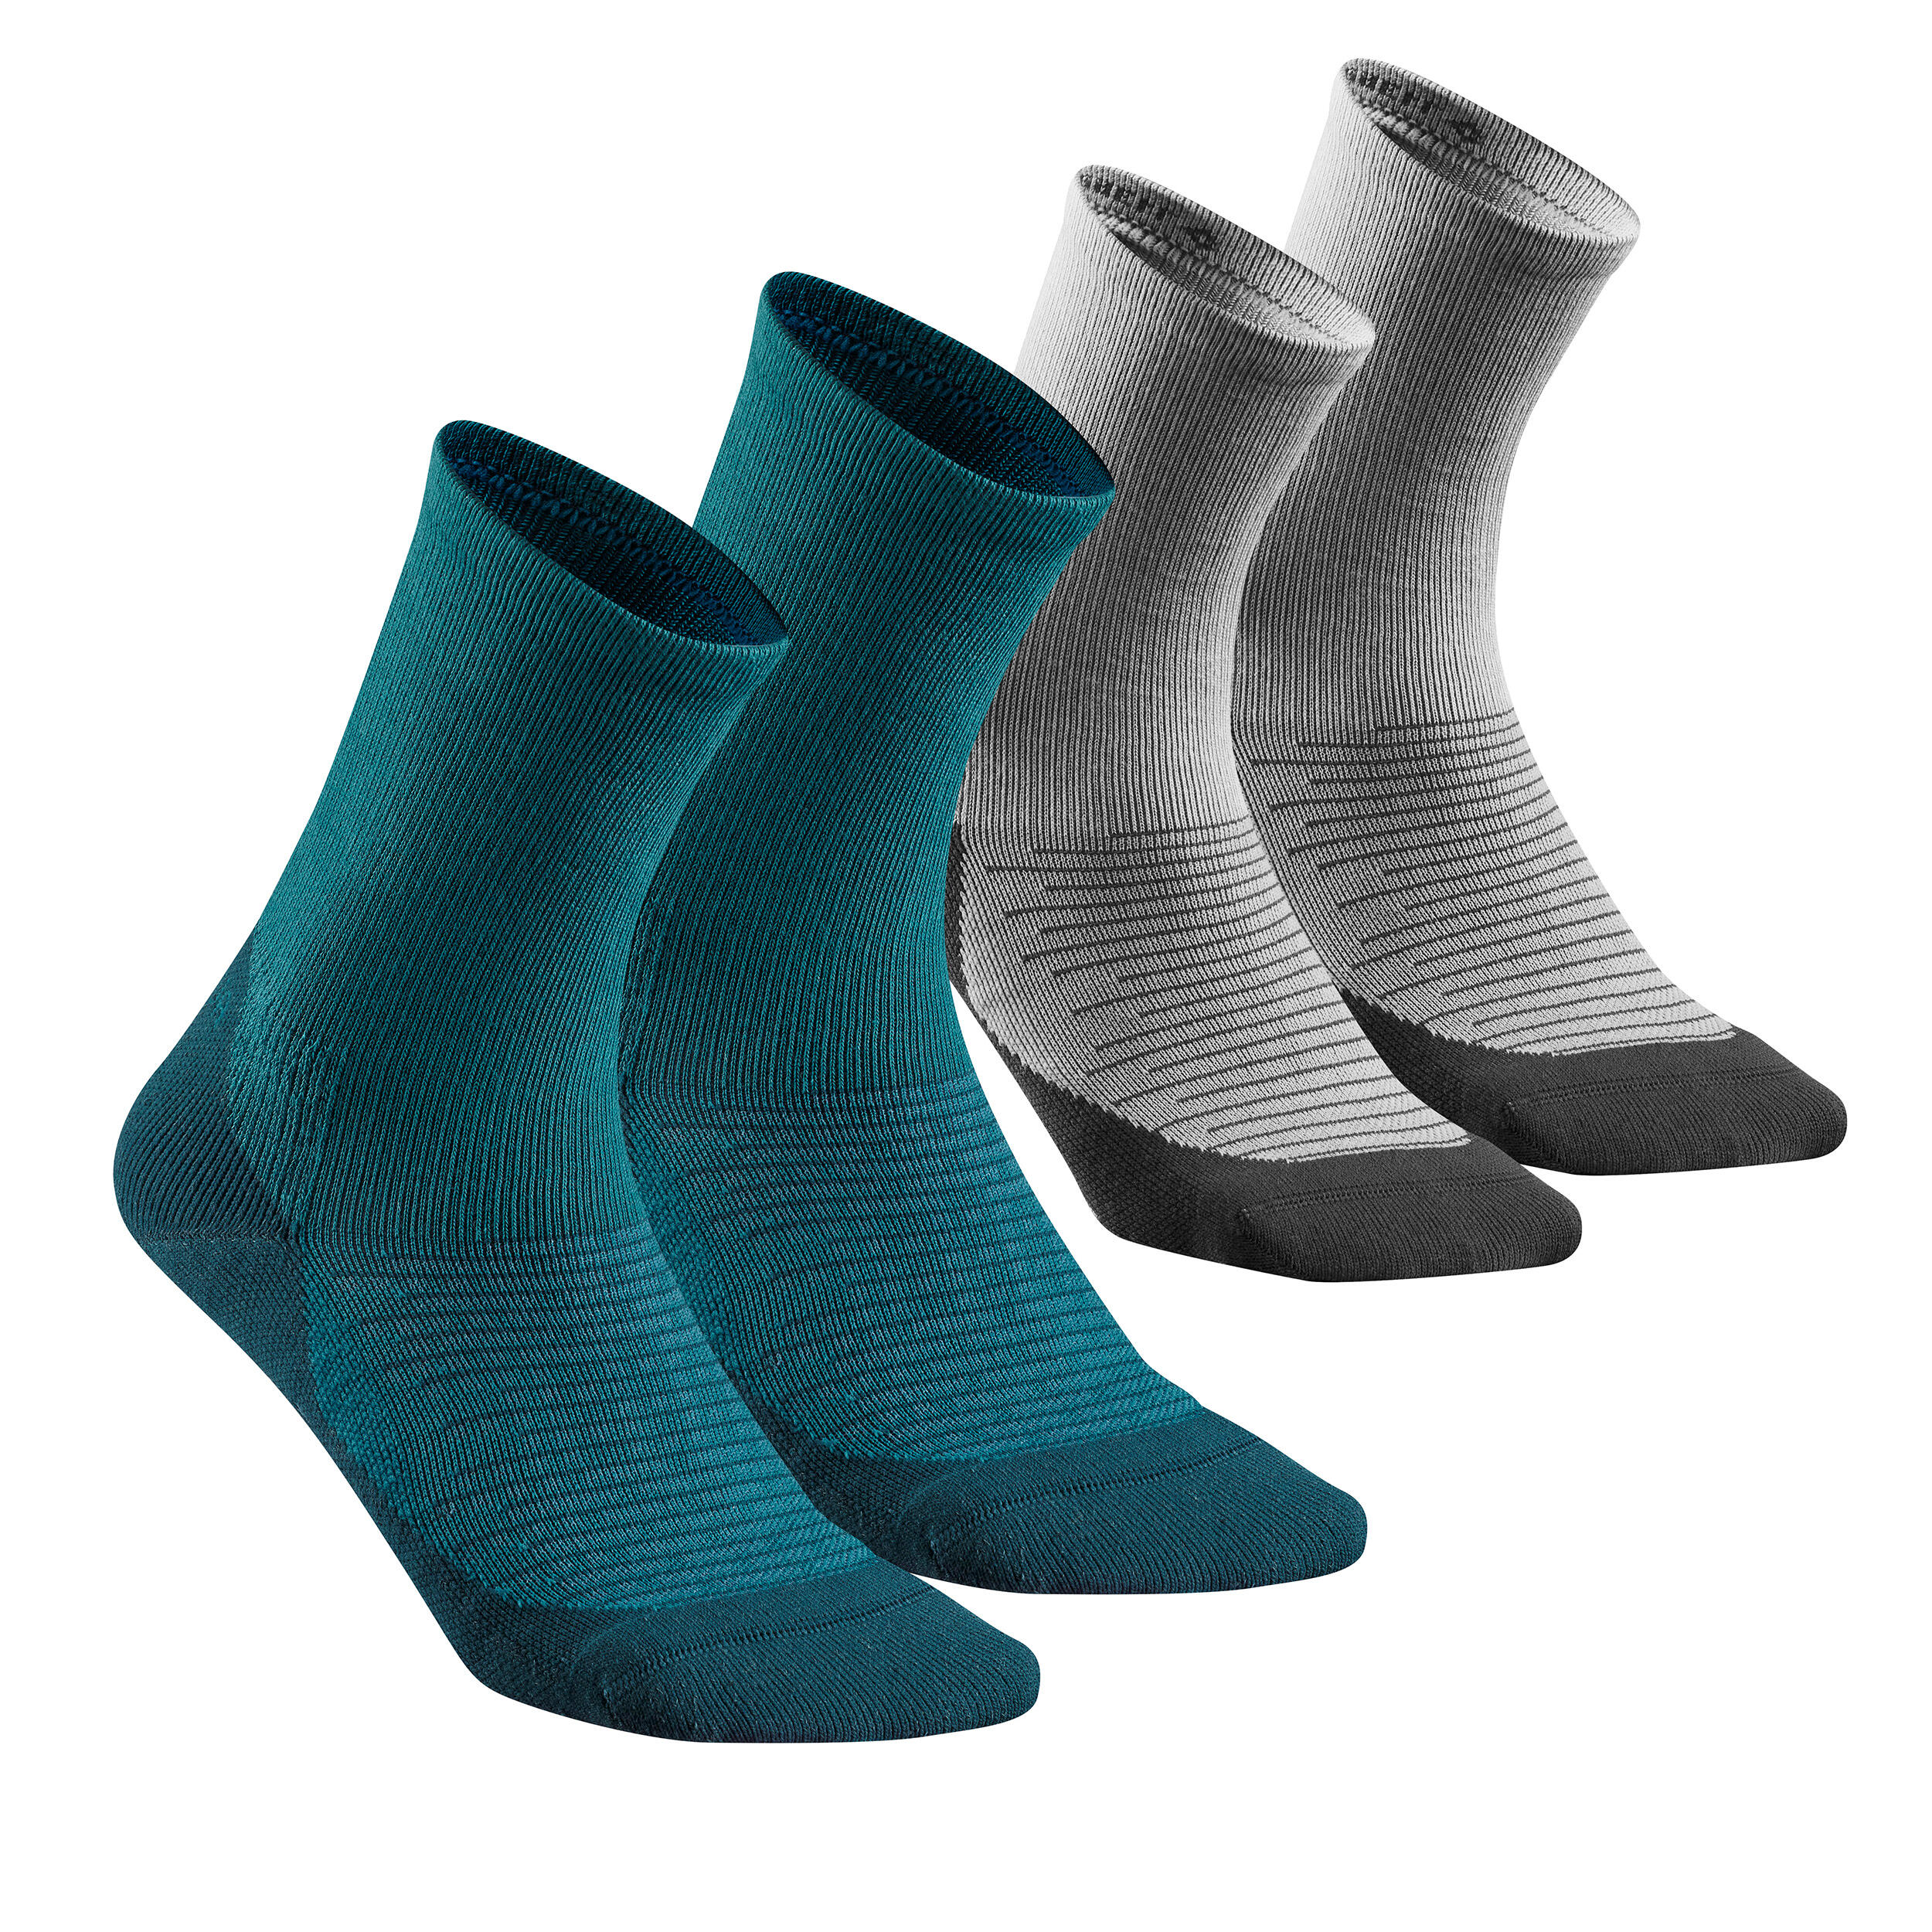 Sock Hike 100 High  - Pack of 2 pairs - Grey and Blue 1/6